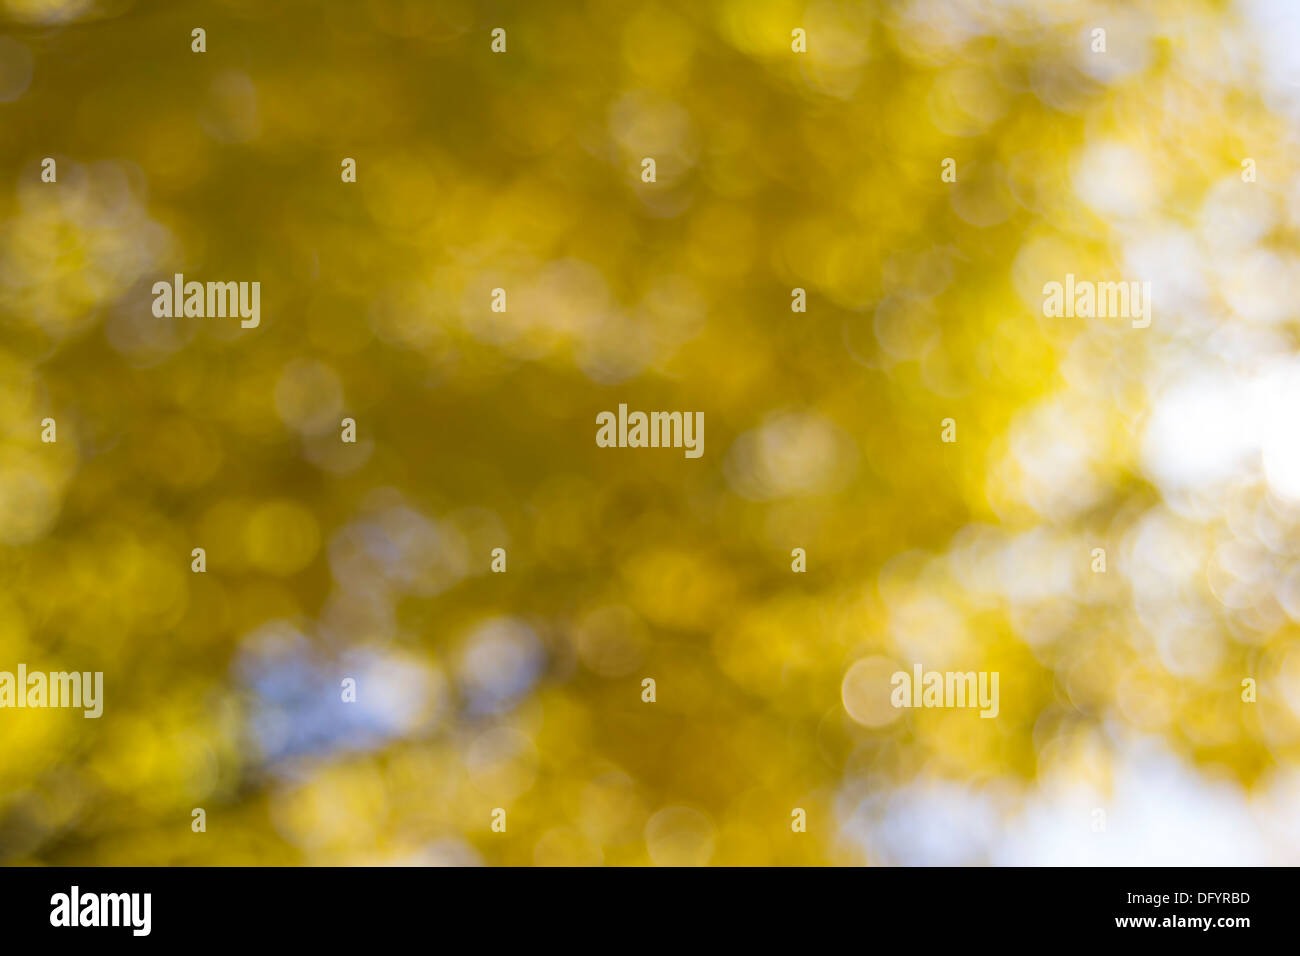 Yellow Fall Color Leaves Against Sunlight Blurred Background Stock Photo